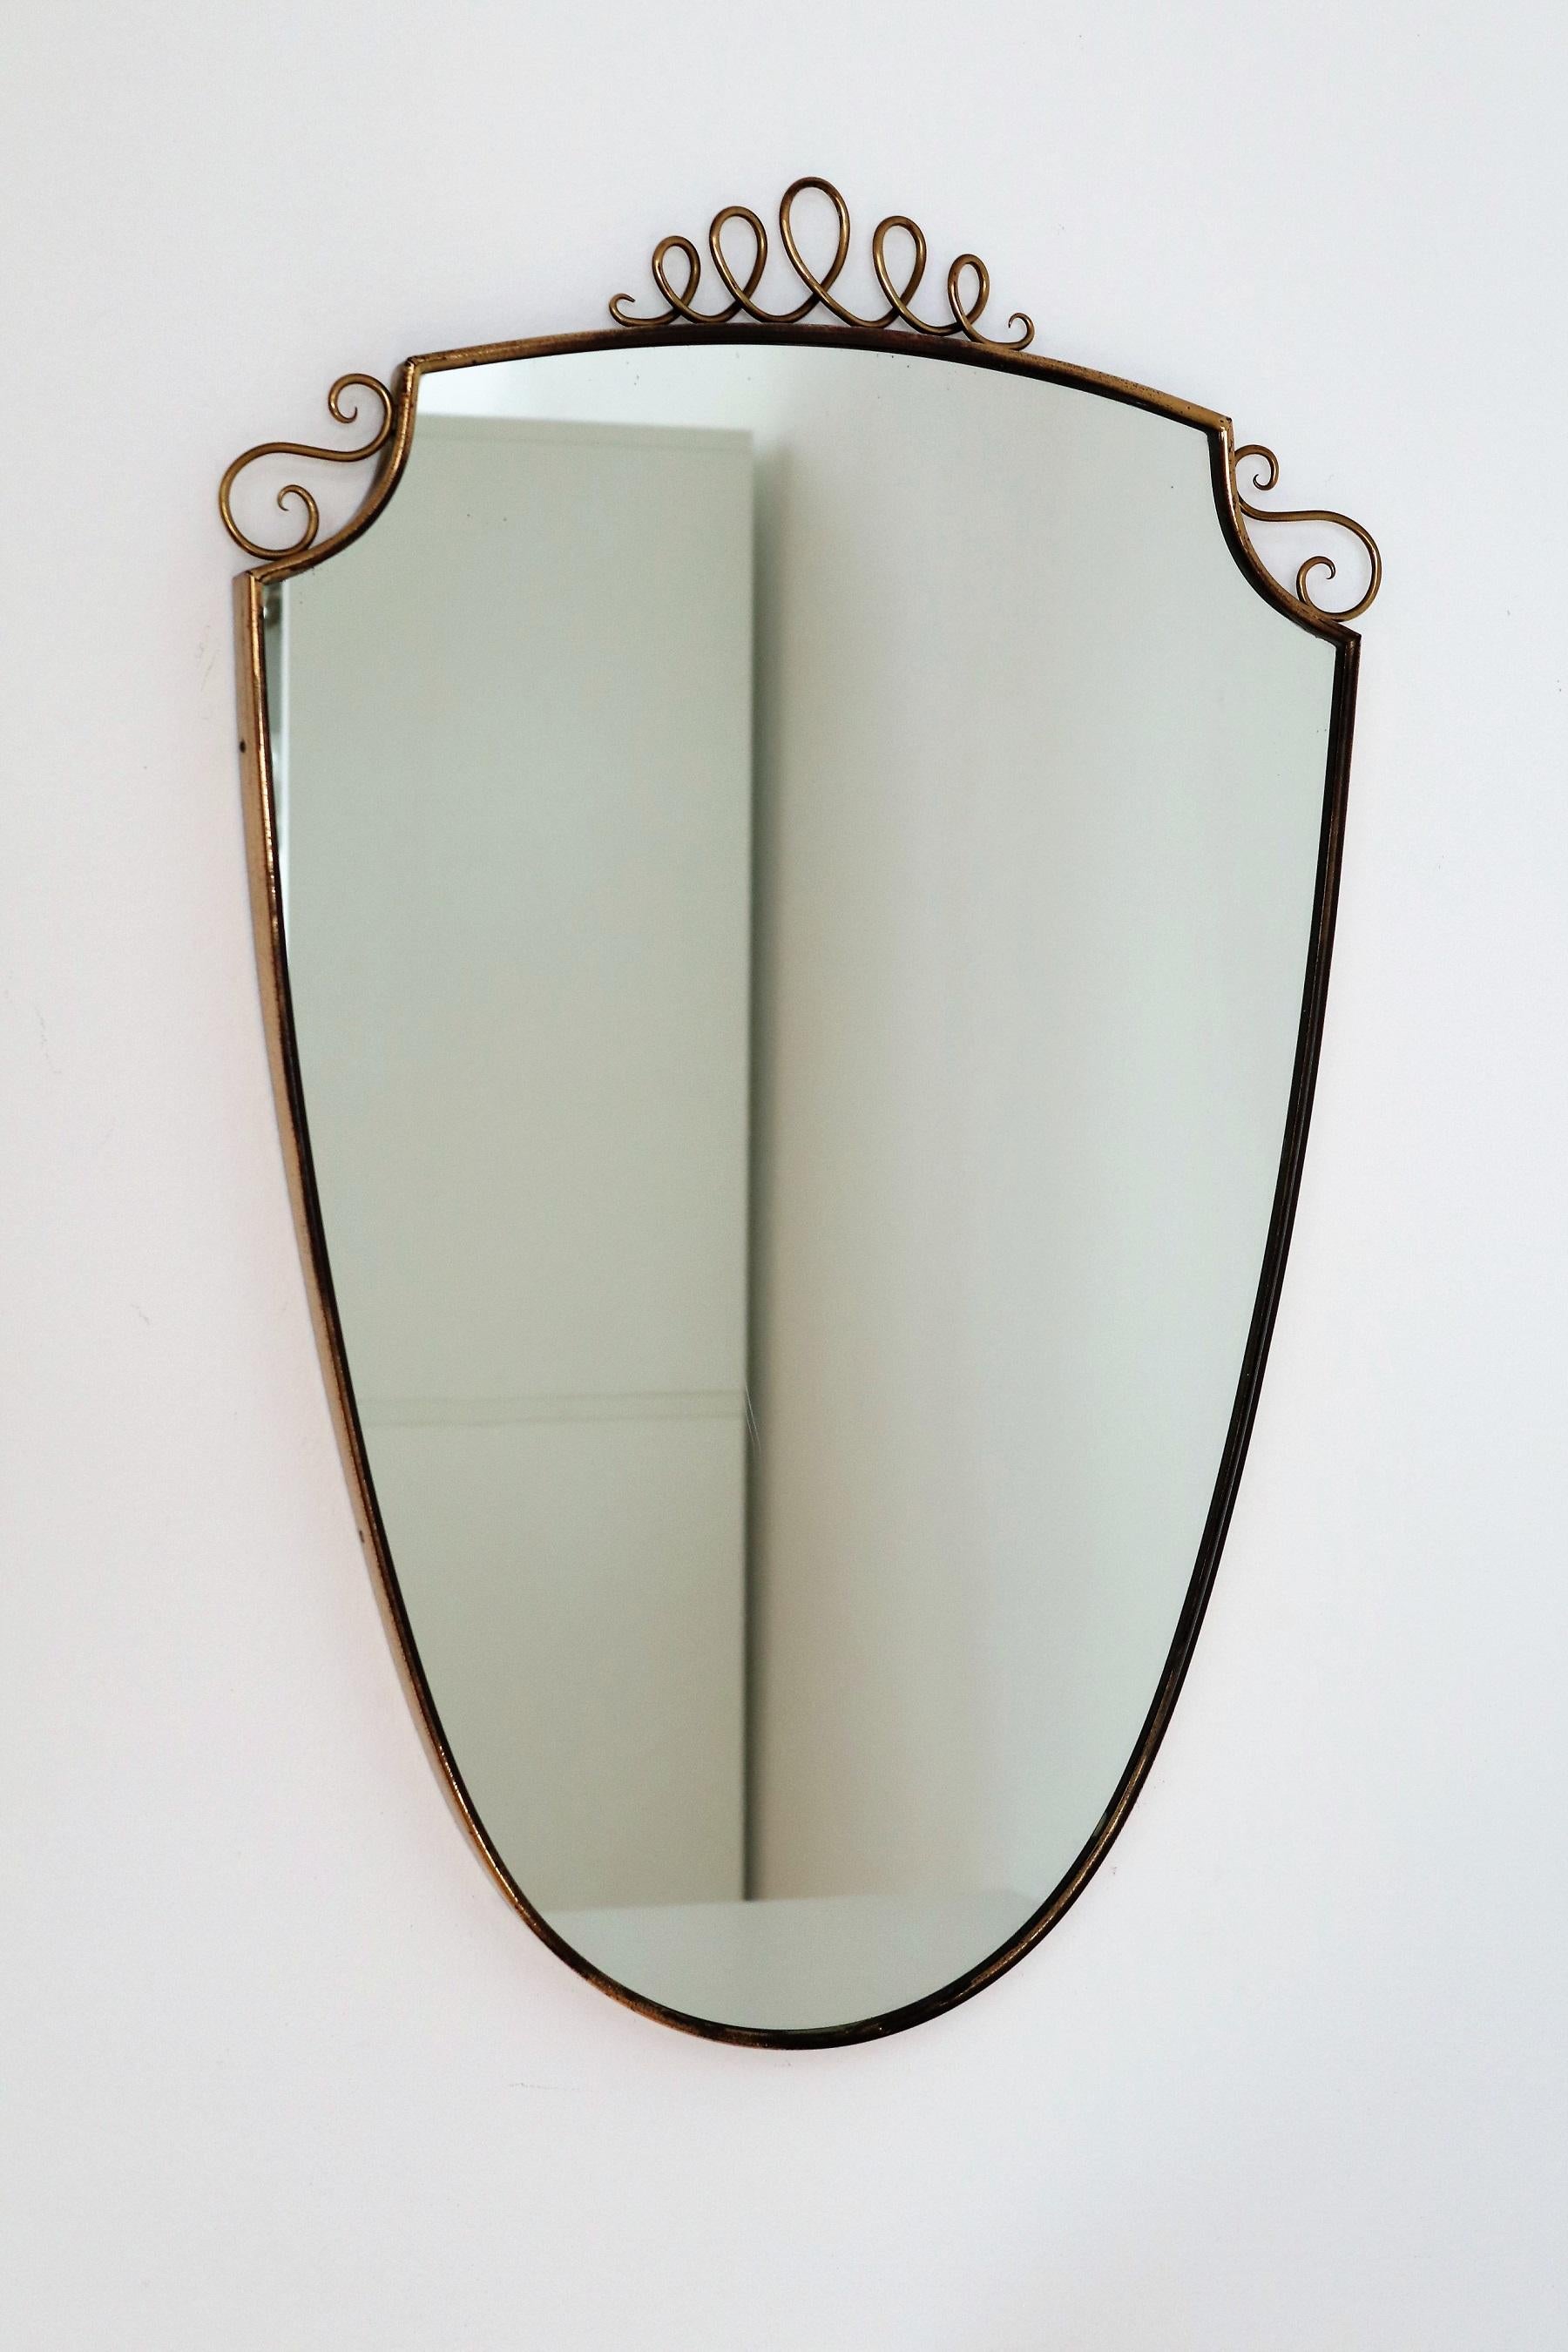 Mid-Century Modern Italian Midcentury Brass Mirror with Decoration in the Style of Gio Ponti, 1950s